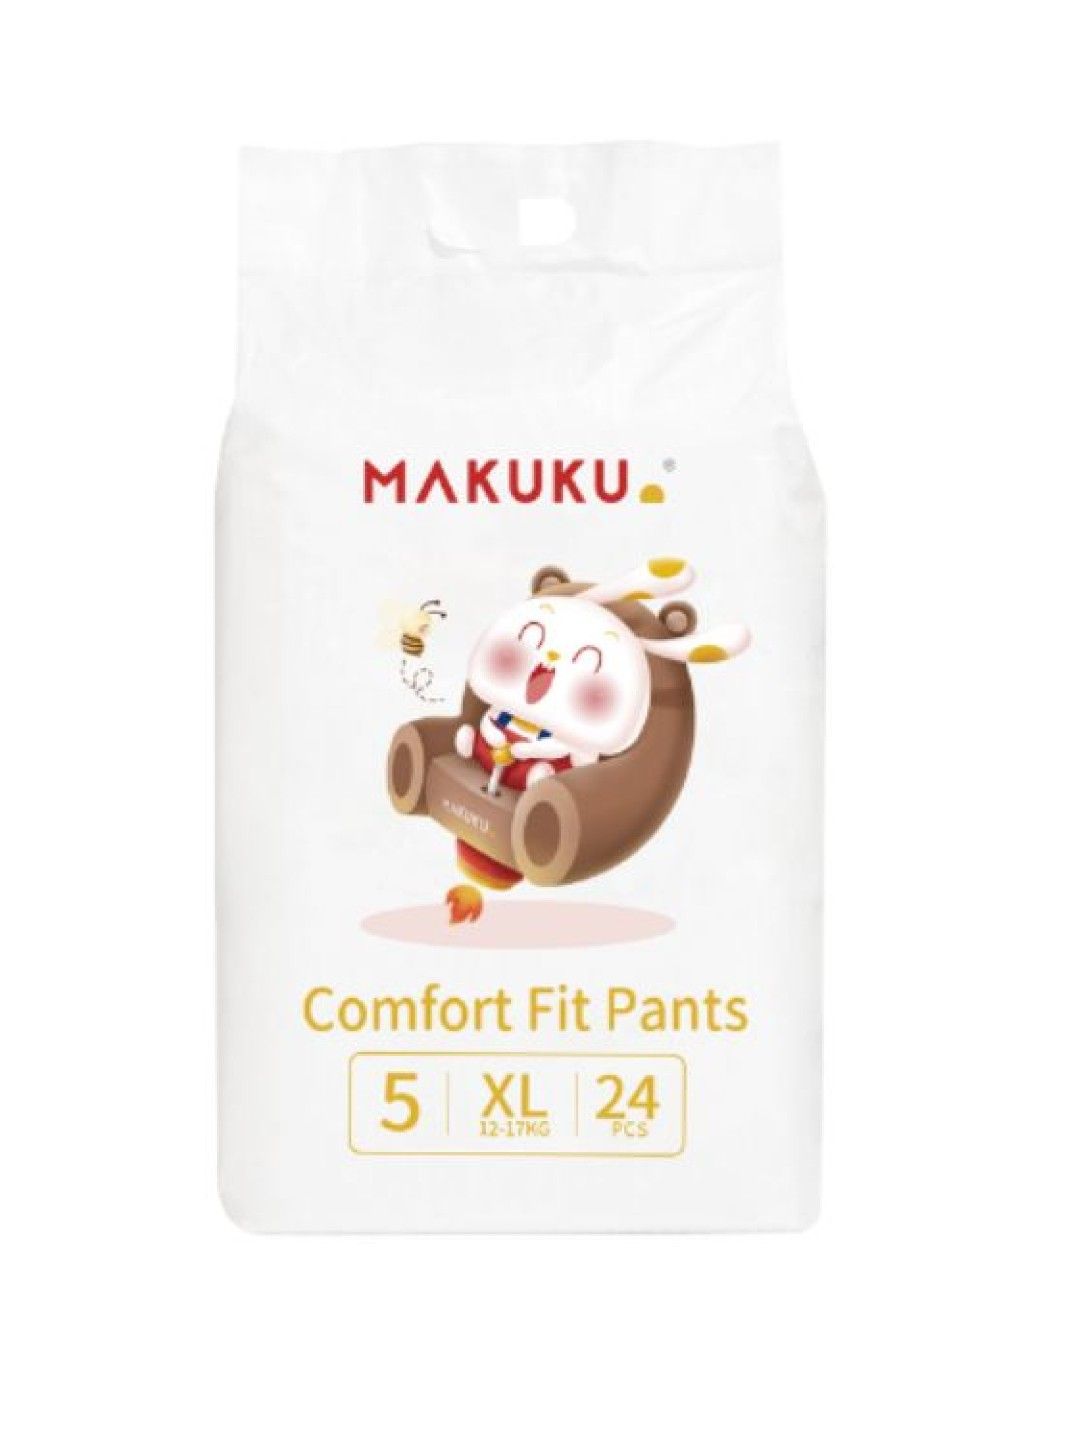 Makuku Baby Soft and Breathable Comfort Fit Diaper Pants, XL (24s)